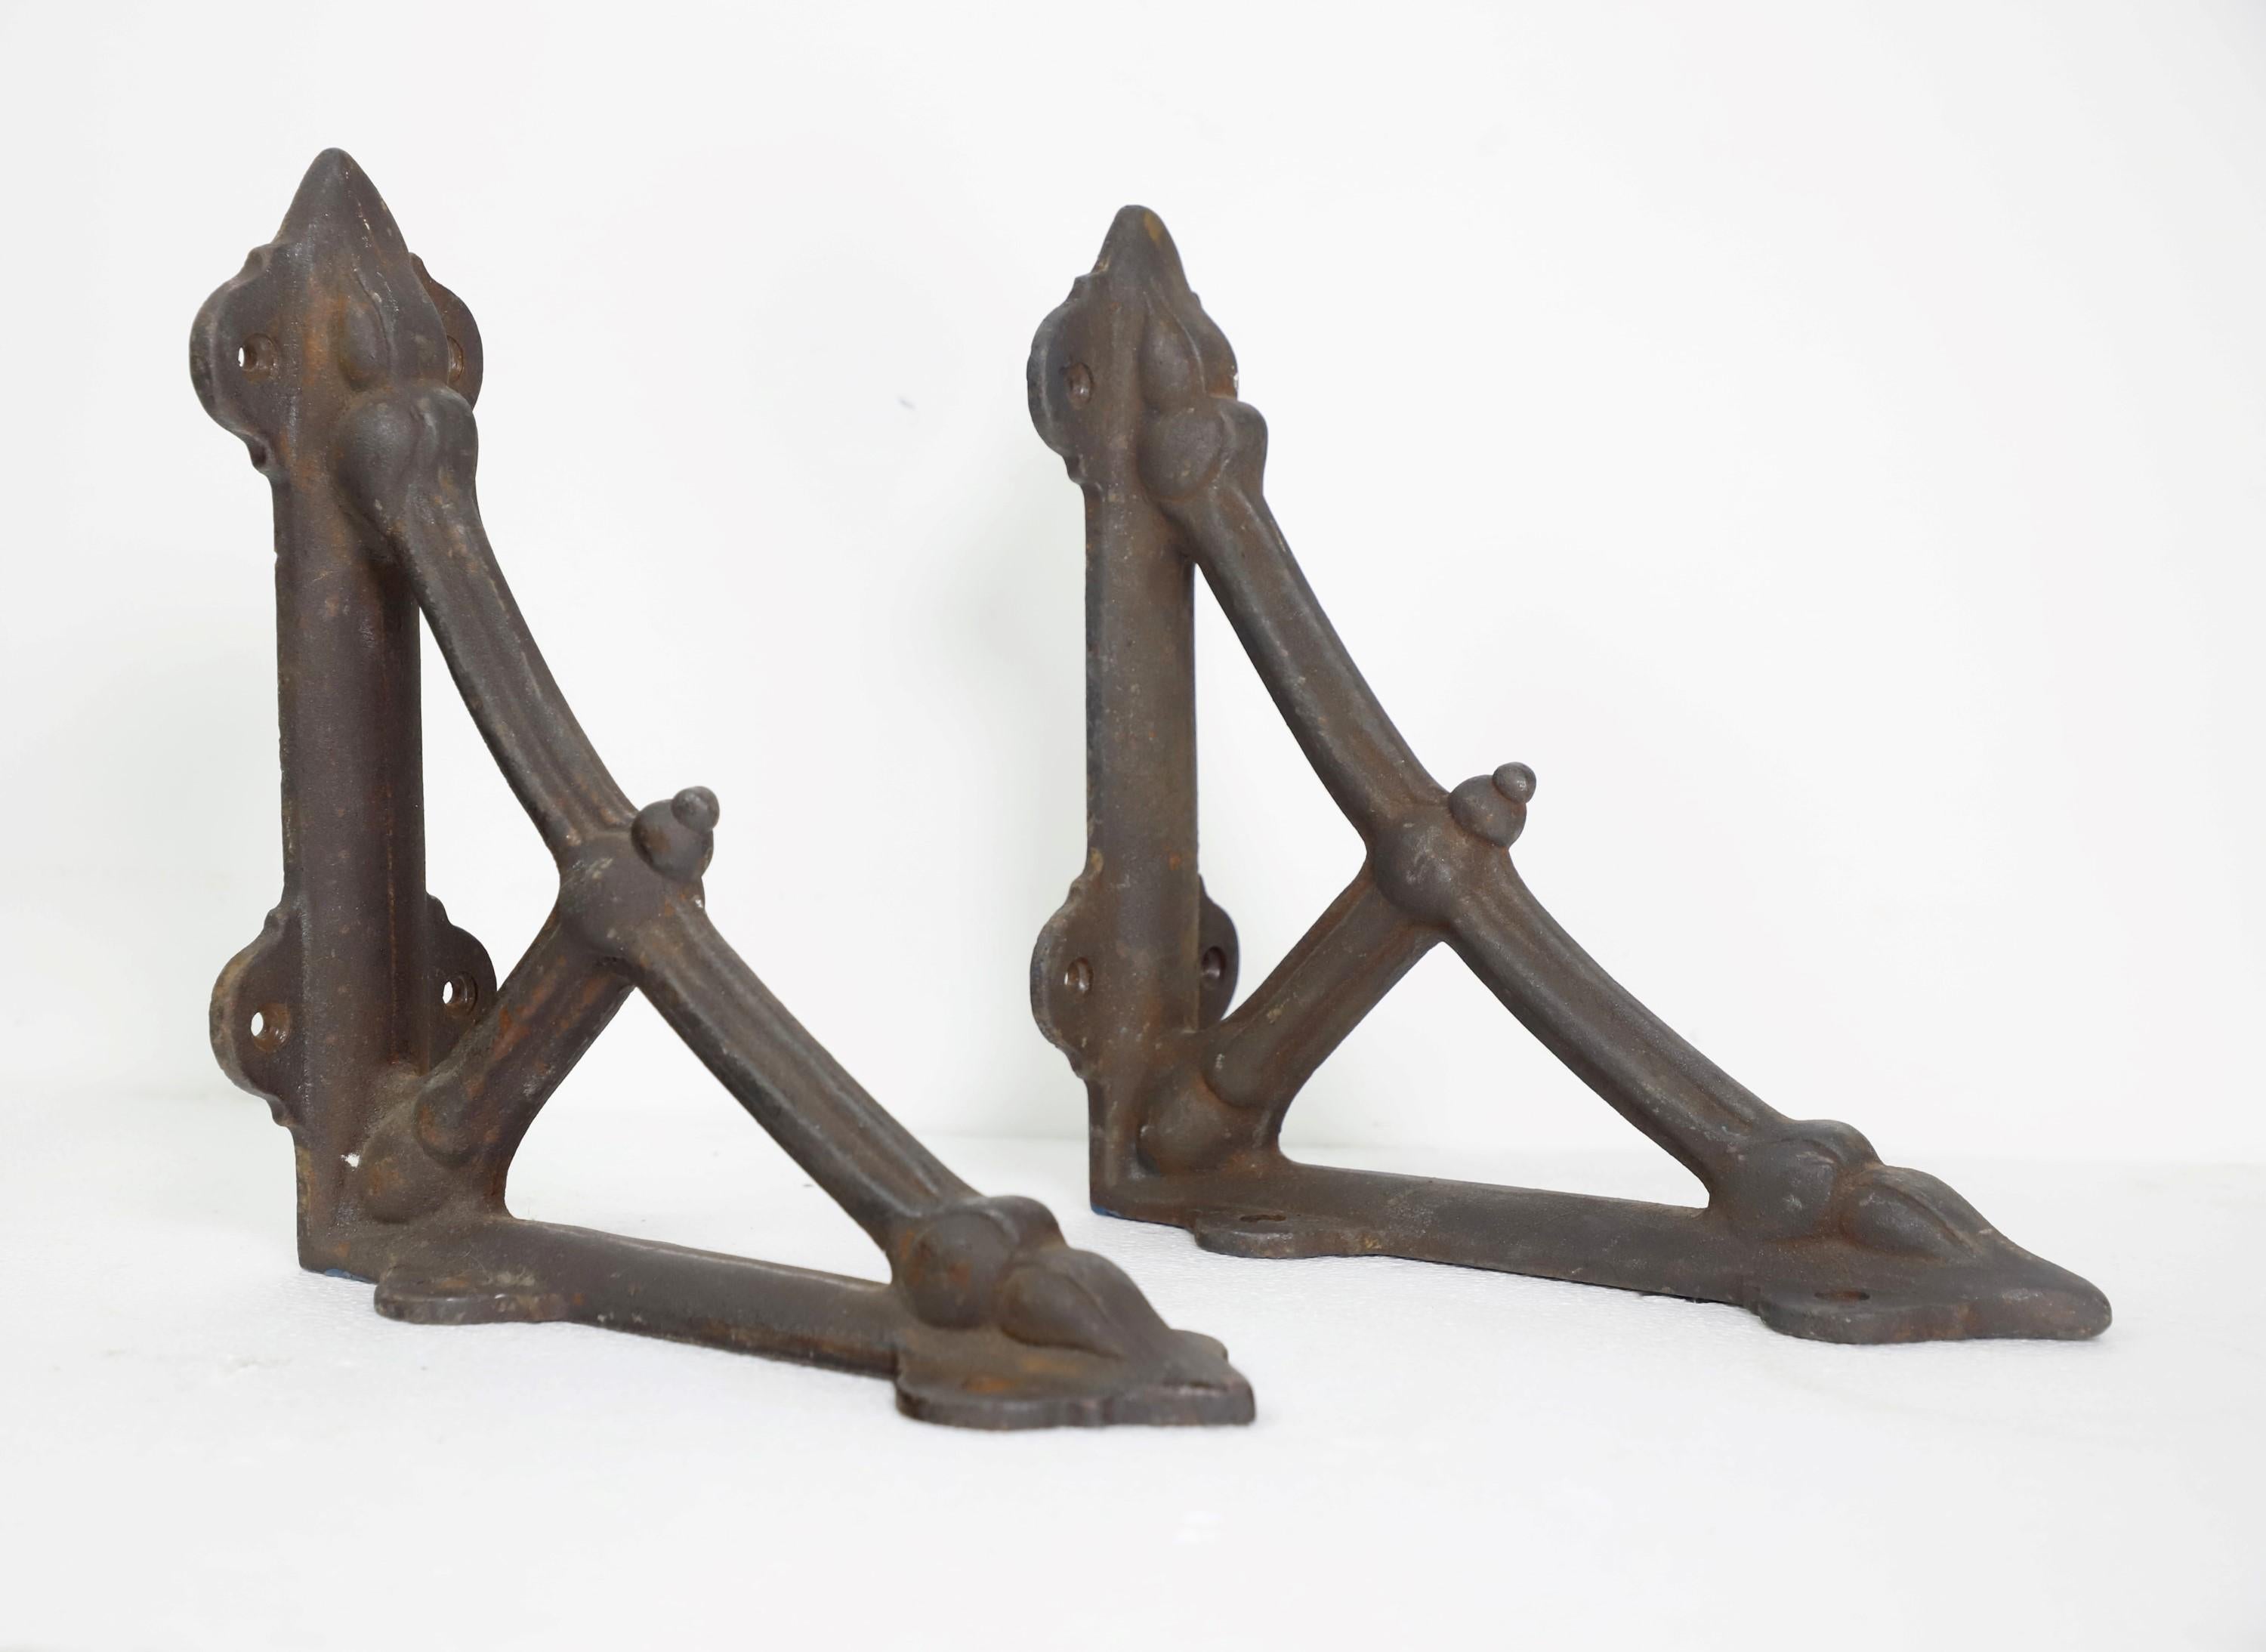 Late 1900s heavy duty 10 in. x 10 1/4 in. Cast iron shelf brackets that have a reinforcing truss. Priced as a pair. Please note, this item is located in our Scranton, PA location.